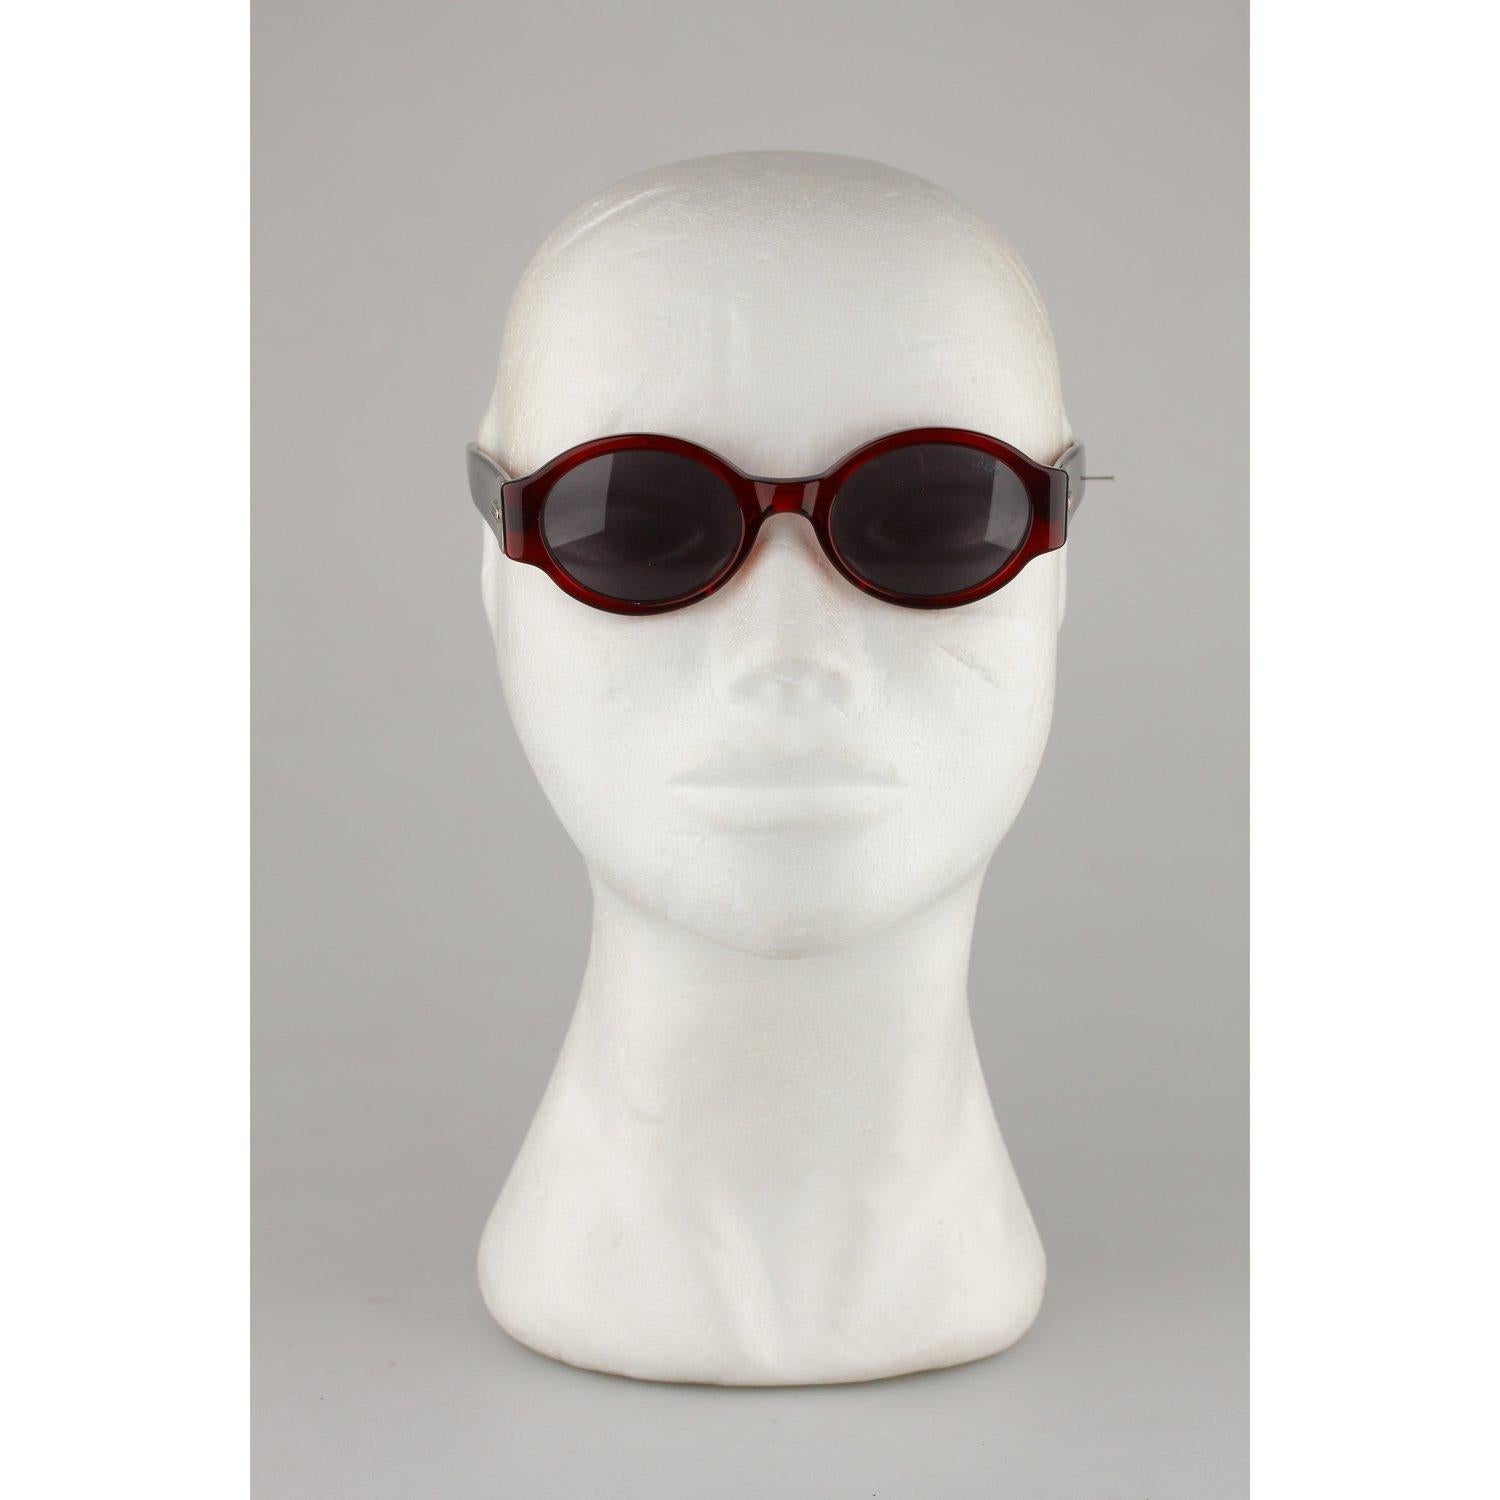 MATERIAL: Acetate COLOR: Burgundy MODEL: Round GENDER: Women SIZE: Medium COUNTRY OF MANUFACTURE: Italy Condition CONDITION DETAILS: NOS - New Old Vintage Stock - Mint Condition, never worn or used - They will come with a GENERIC CASE. Measurements